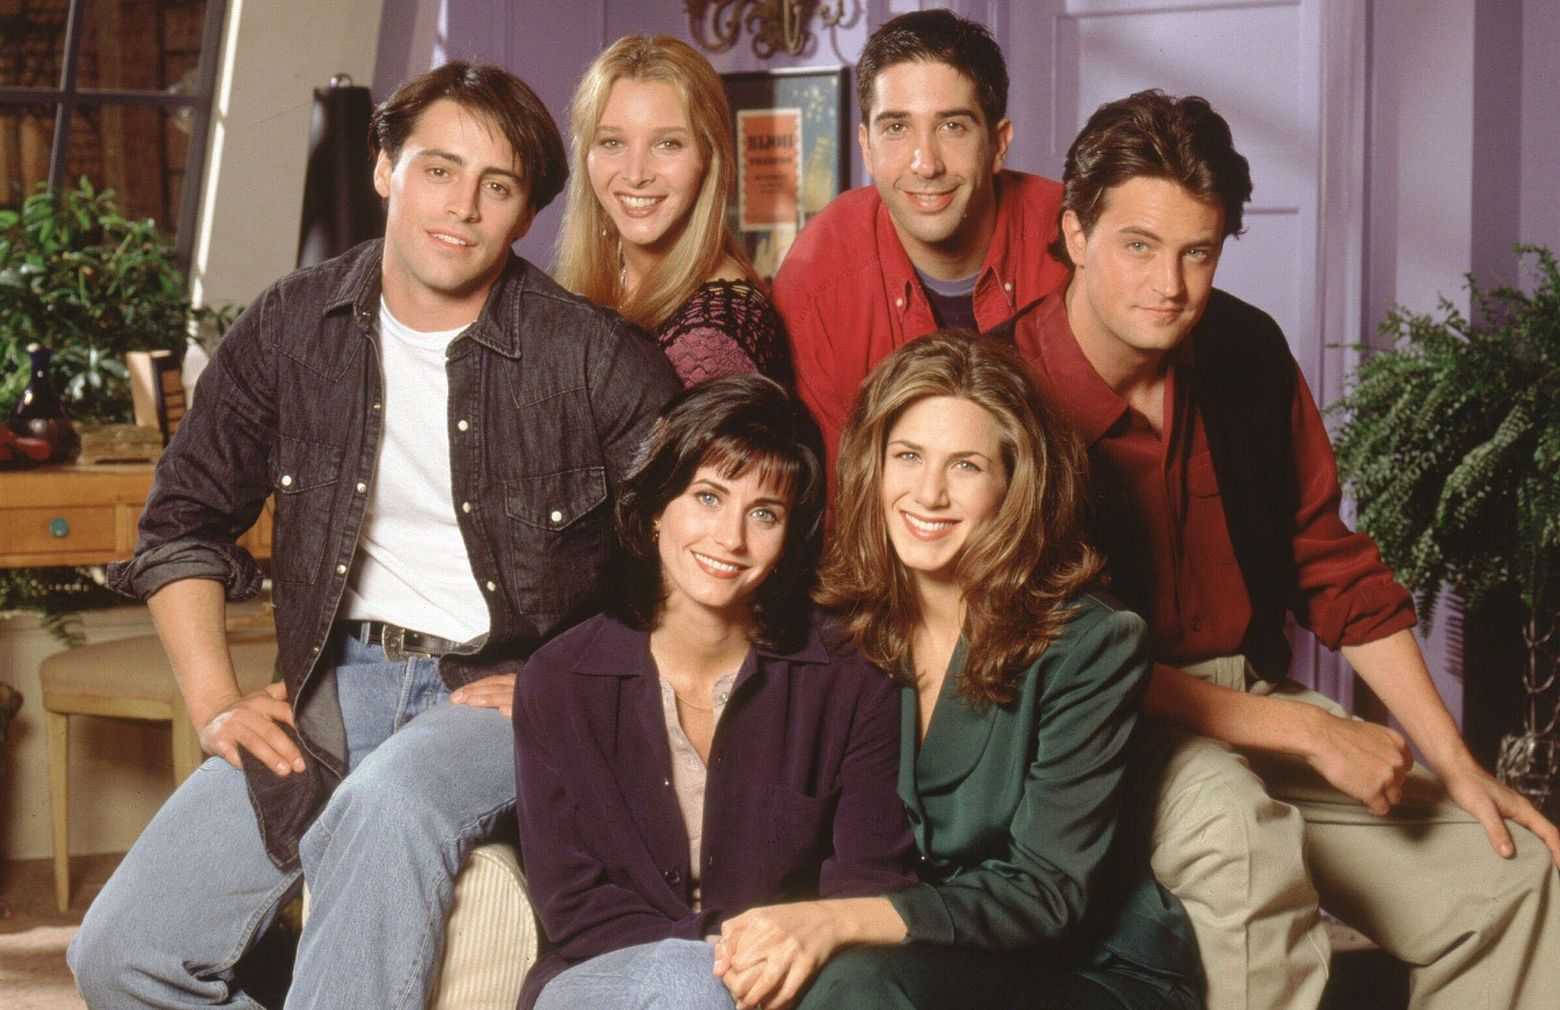 Embrace nostalgia: Where to watch reboots and cast reunions of TV shows  from the '90s and early 2000s | The Seattle Times